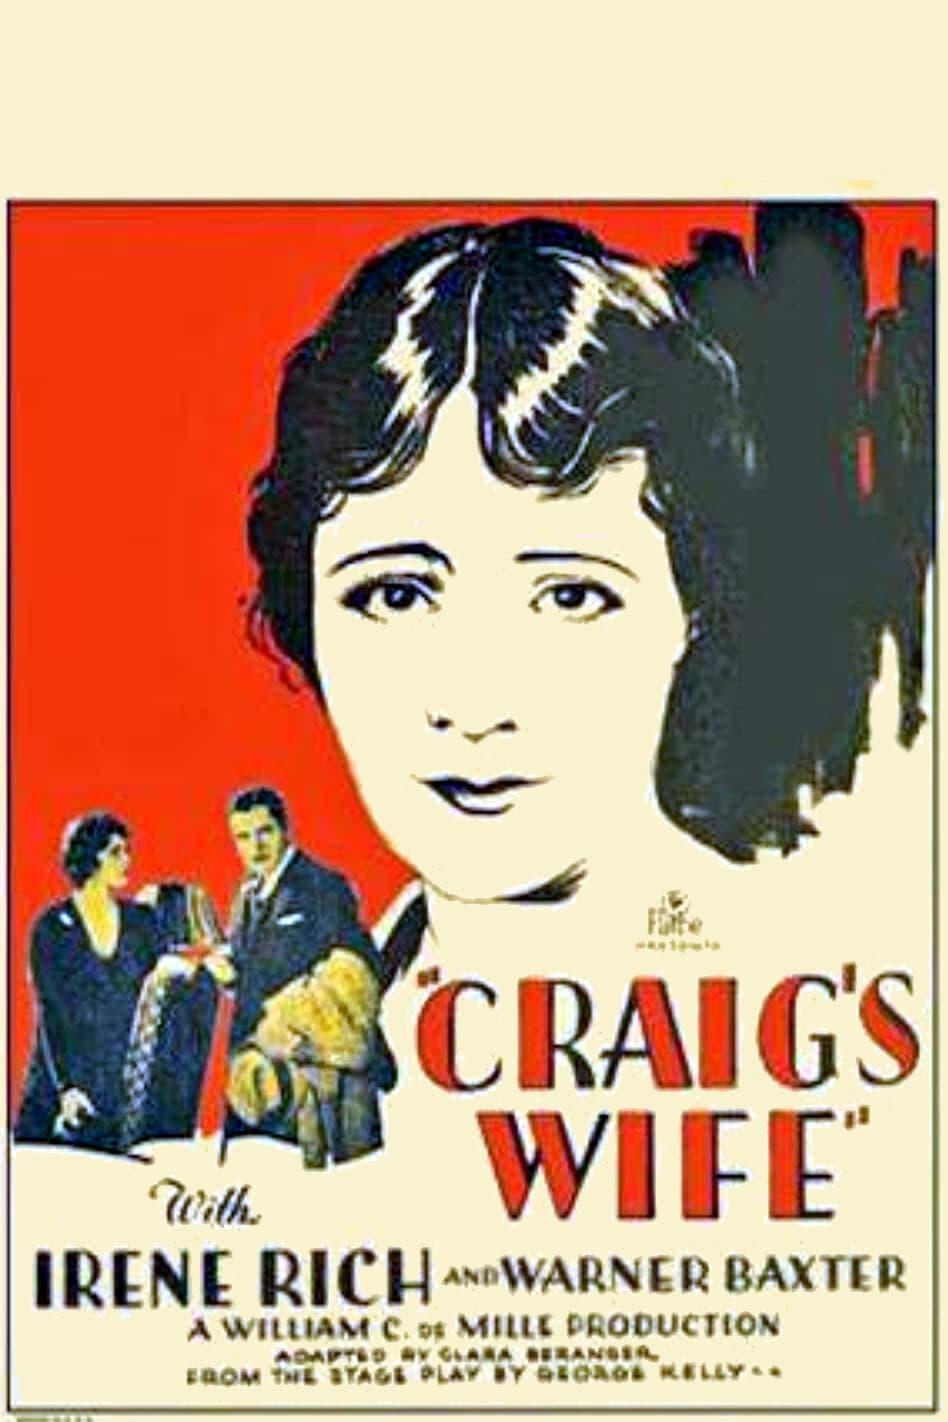 Craig's Wife poster